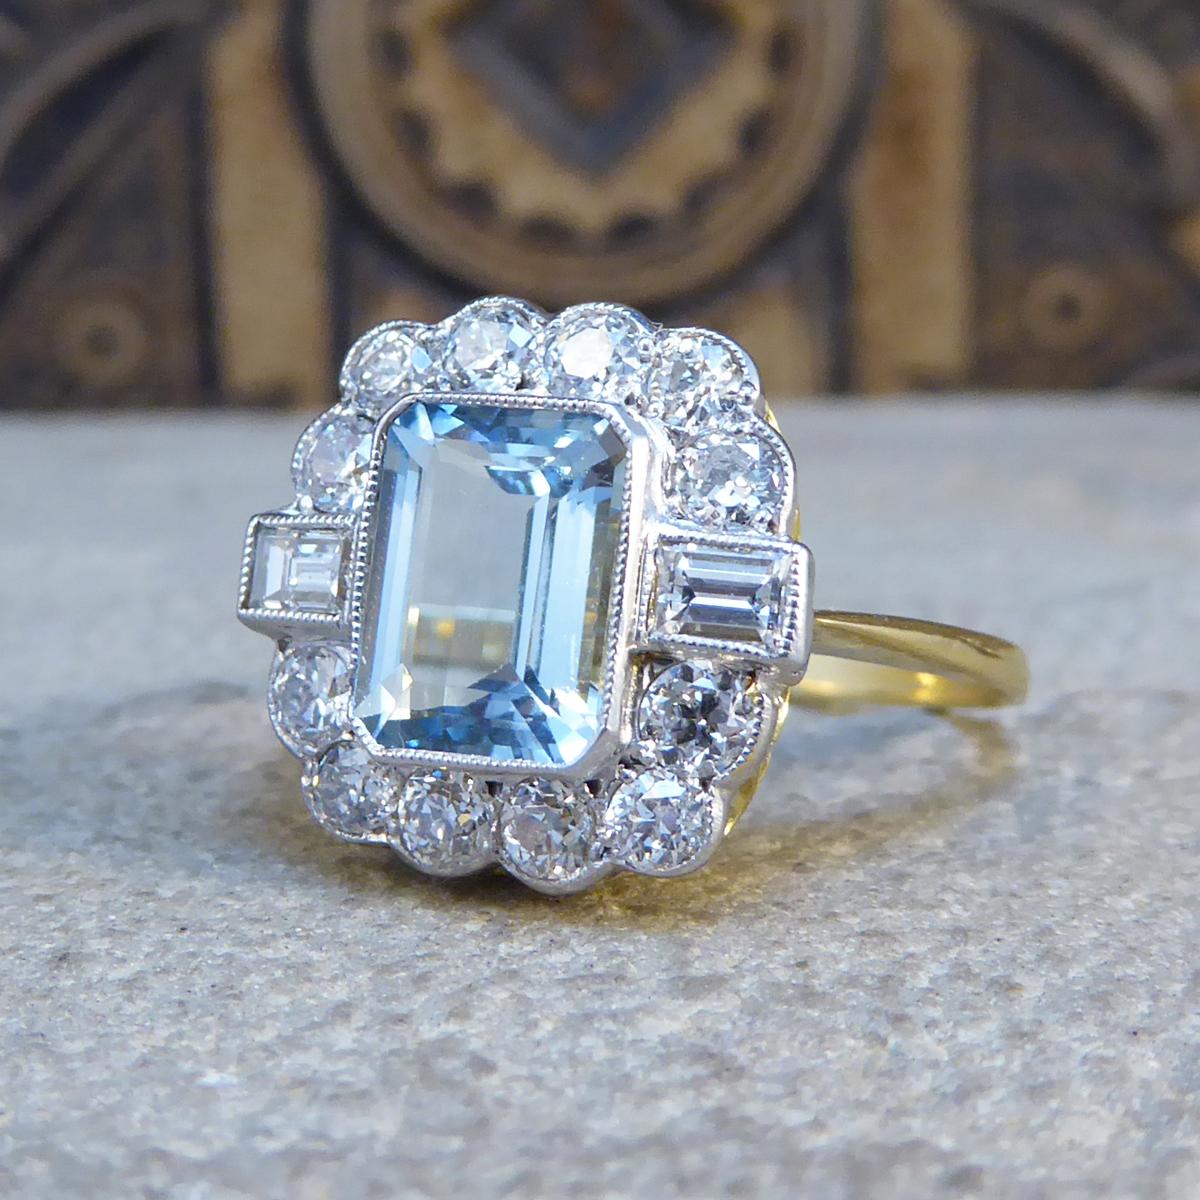 Round Cut Contemporary Edwardian Style 1.50 Carat Aquamarine and Diamond Ring in 18ct Gold